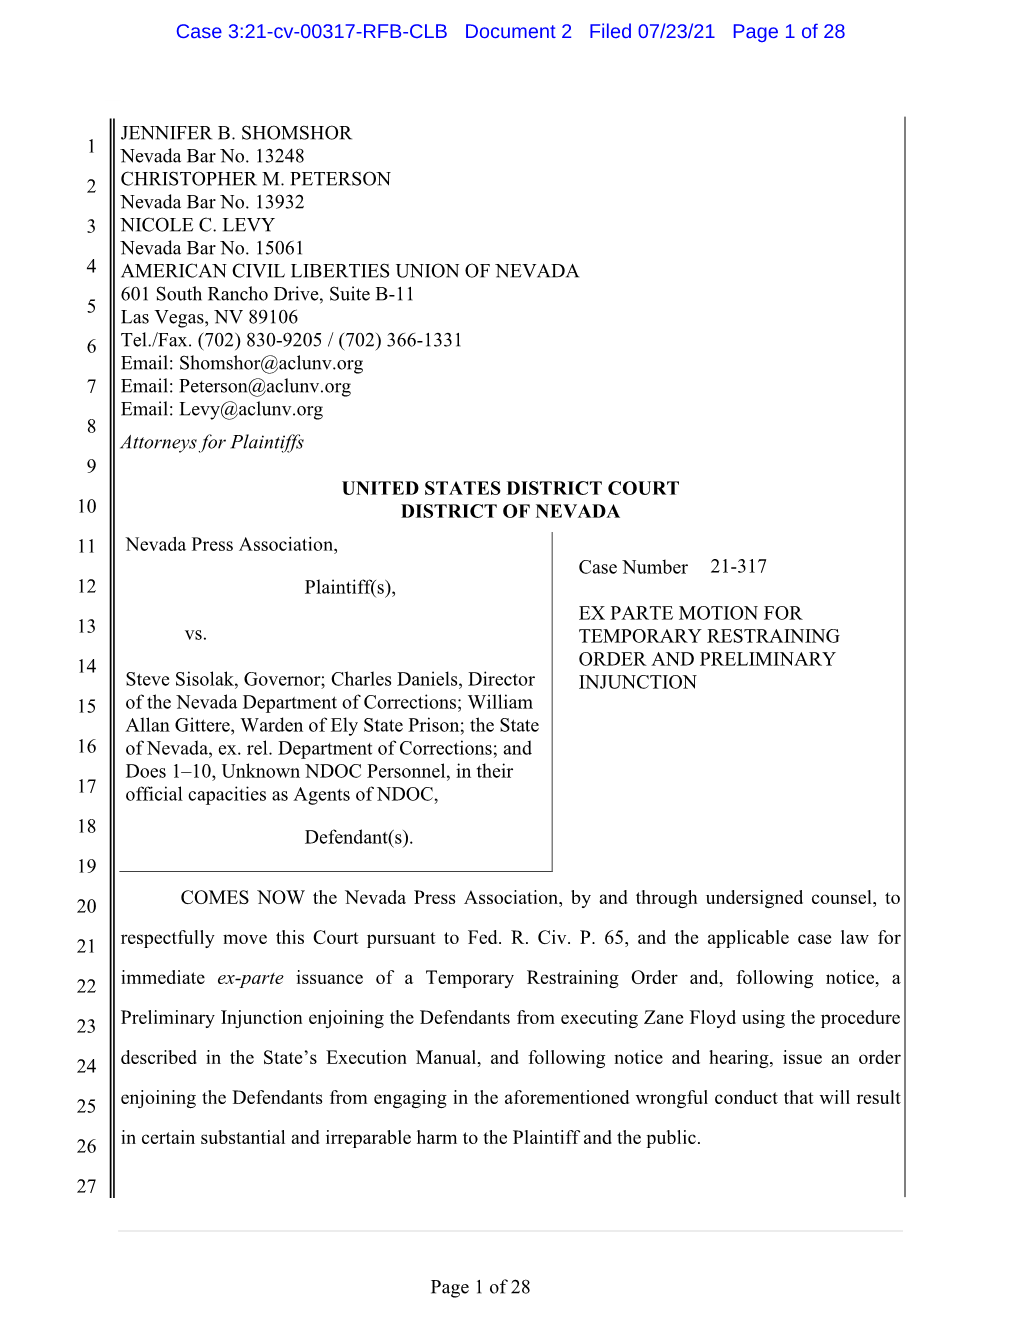 Motion for Temporary Restraining Order and Preliminary Injunction 22 Against the Defendants